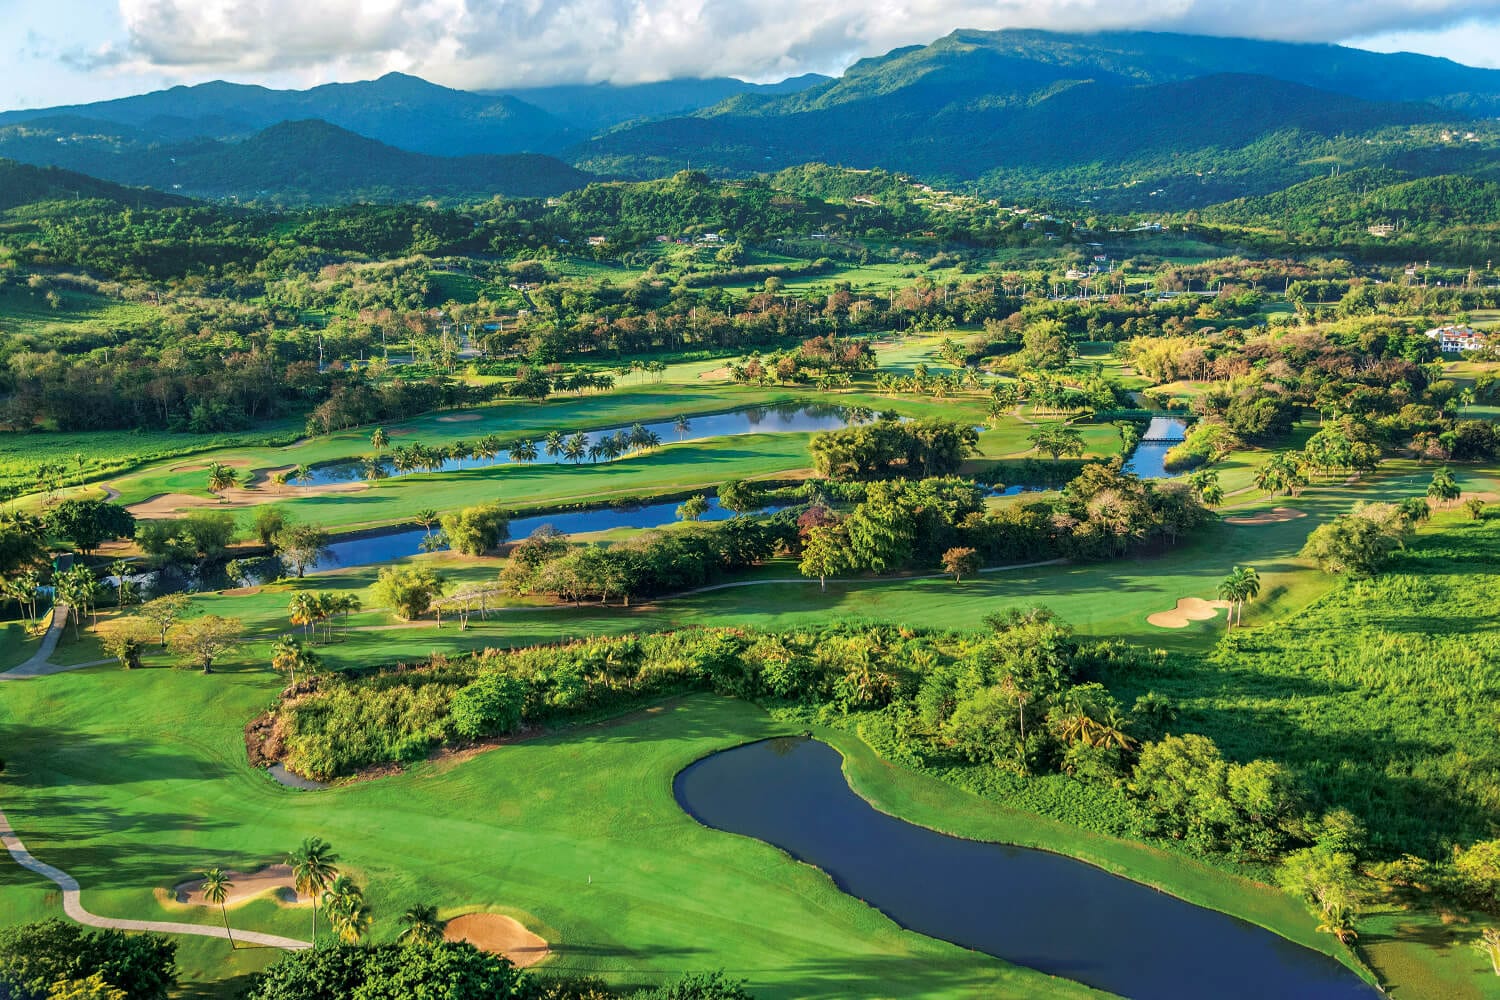 Panoramic view of a pristine golf course with well-manicured fairways, vibrant greenery, and a clear blue sky